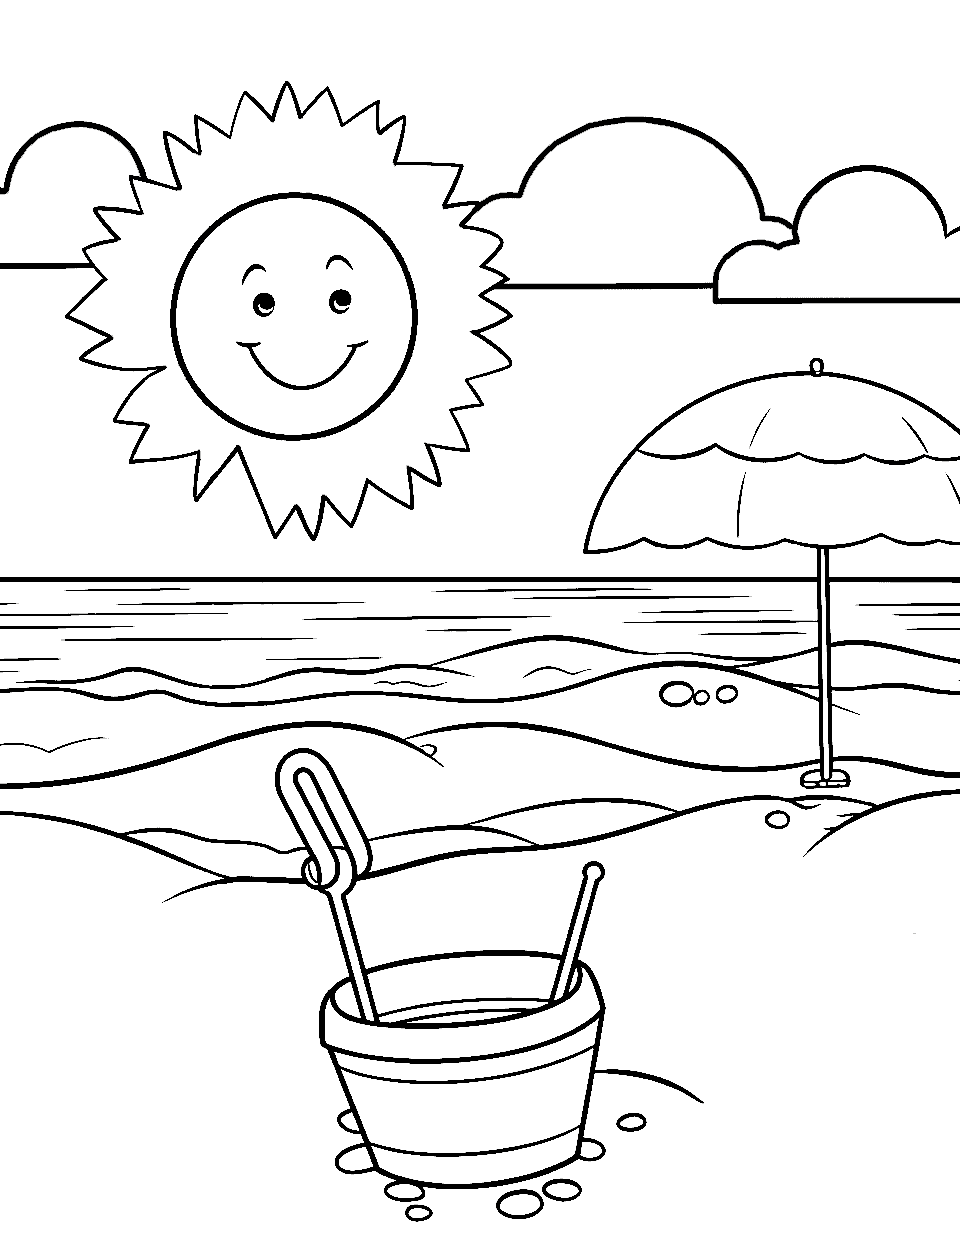 Sunny Beach Day Coloring Page - A smiling sun shining brightly over a simple beach scene with a bucket and spade.